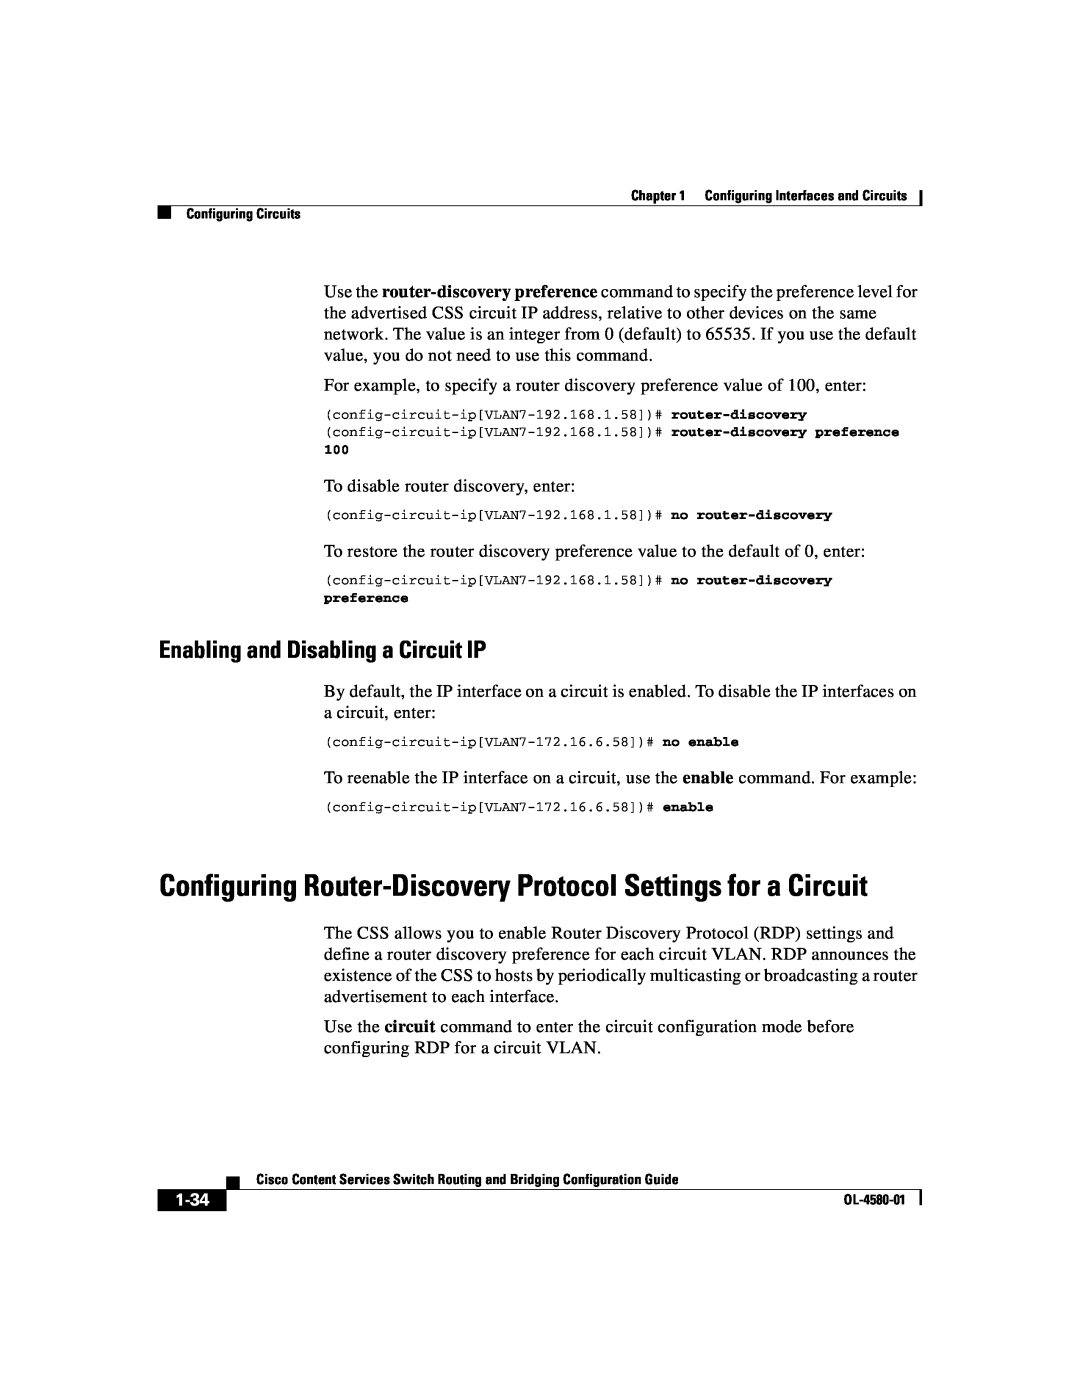 Cisco Systems OL-4580-01 Enabling and Disabling a Circuit IP, Configuring Router-Discovery Protocol Settings for a Circuit 